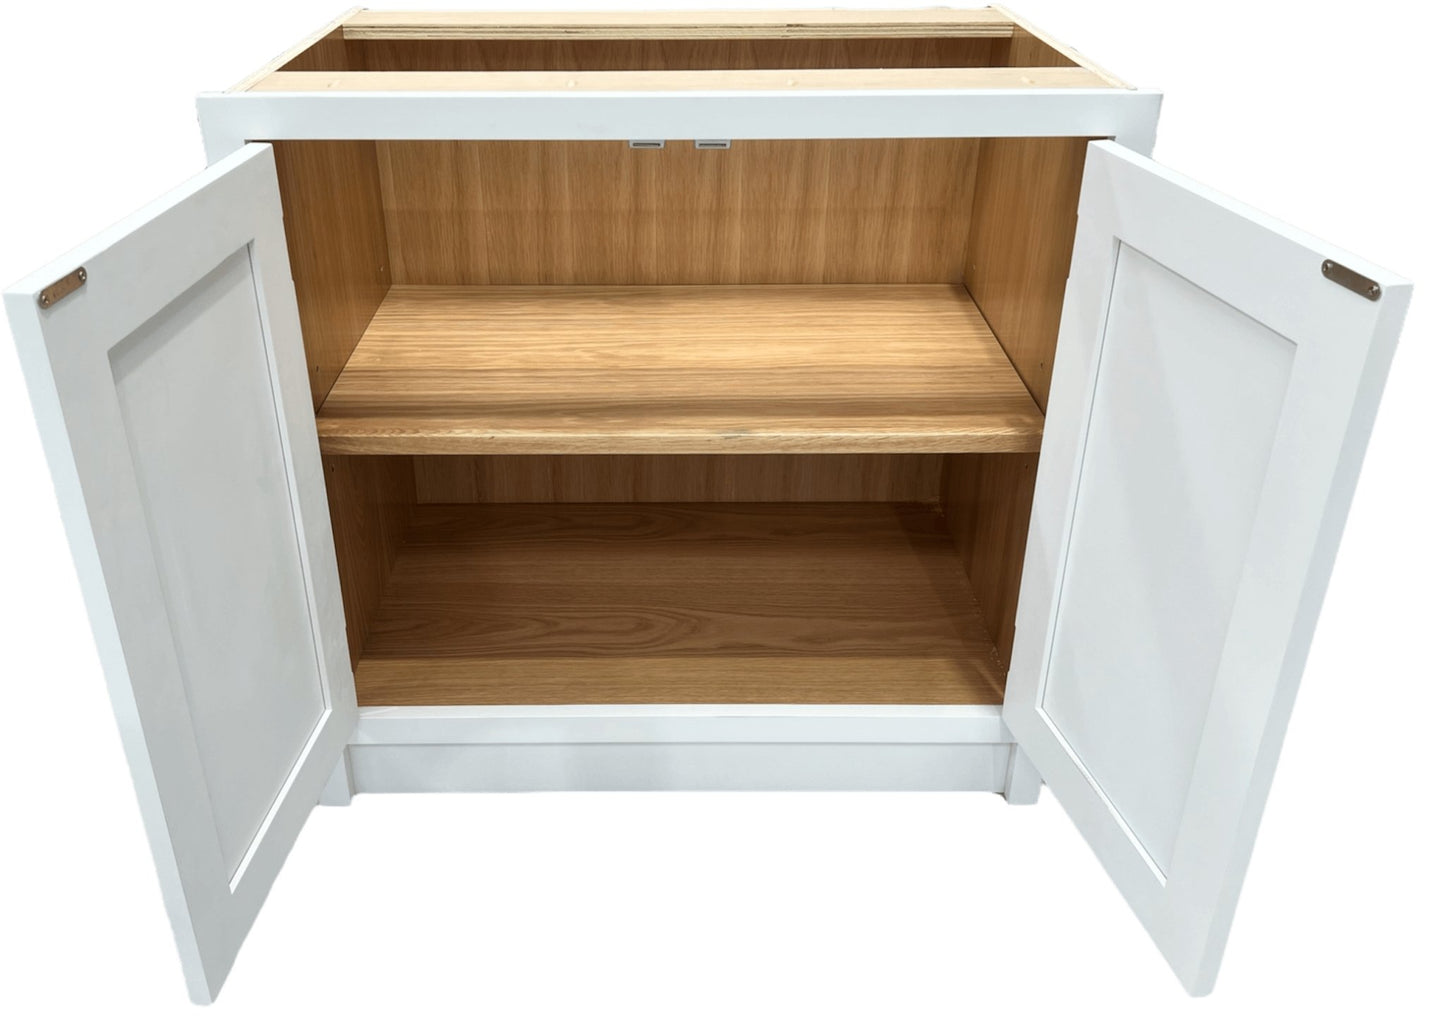 BH 900 - 900mm Highline double door base unit - Classic Kitchens Direct